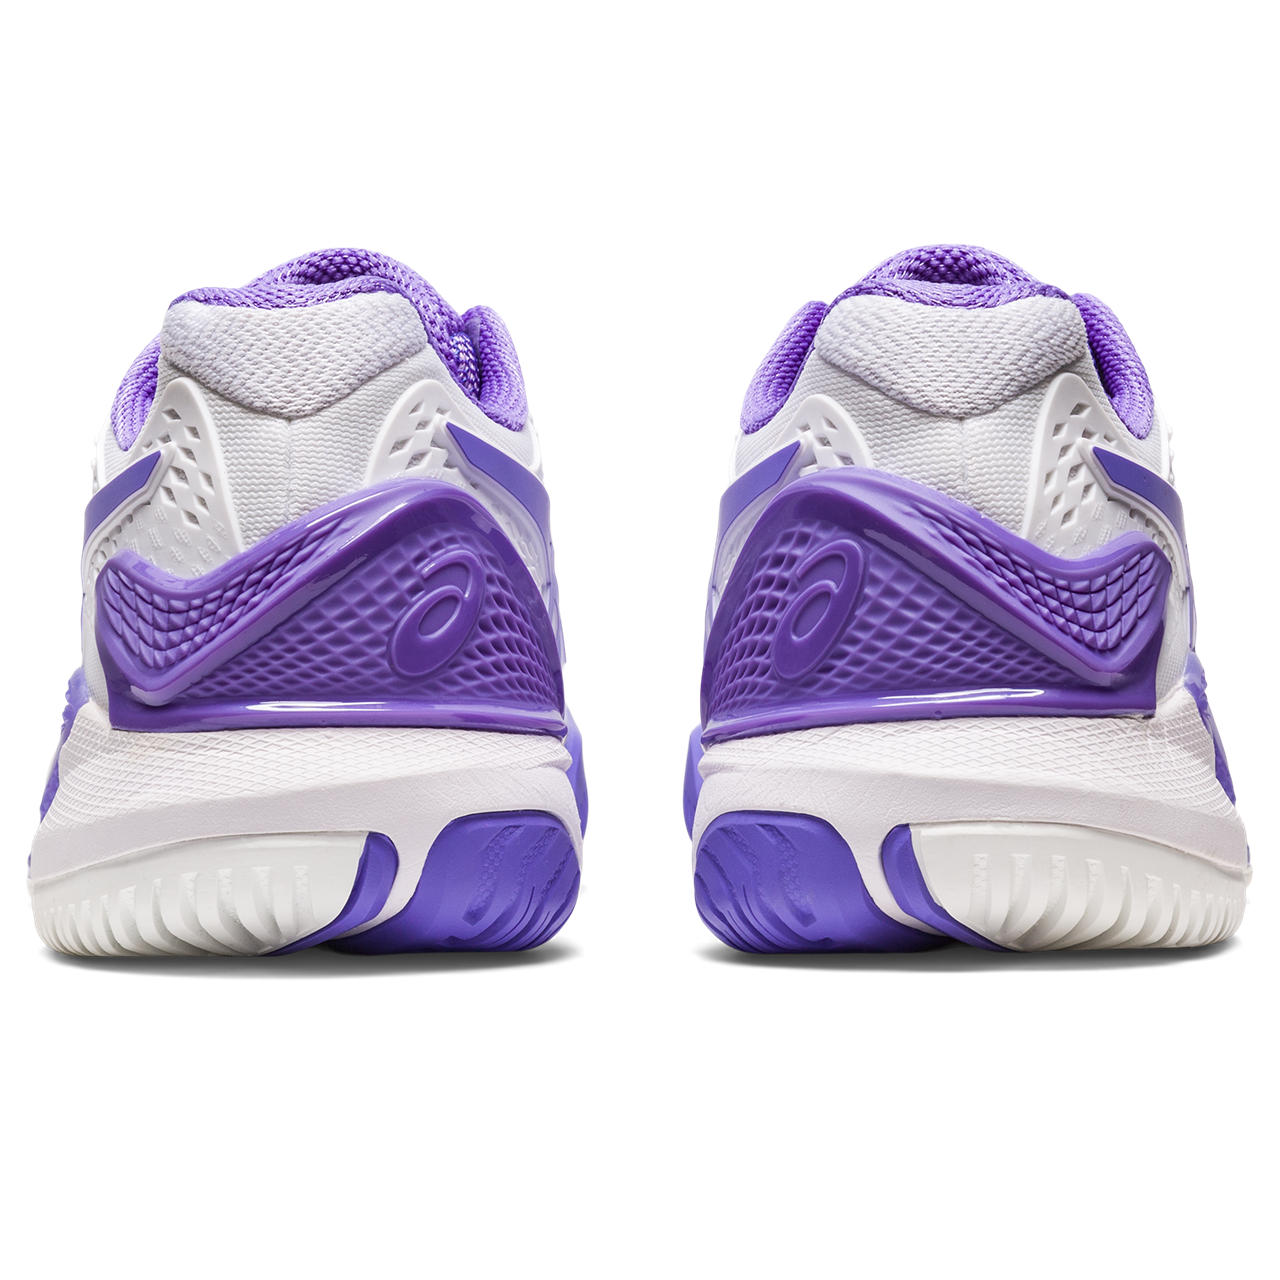 Back view of the Women's ASIC Resolution 9 tennis shoe in the color White/Amethyst